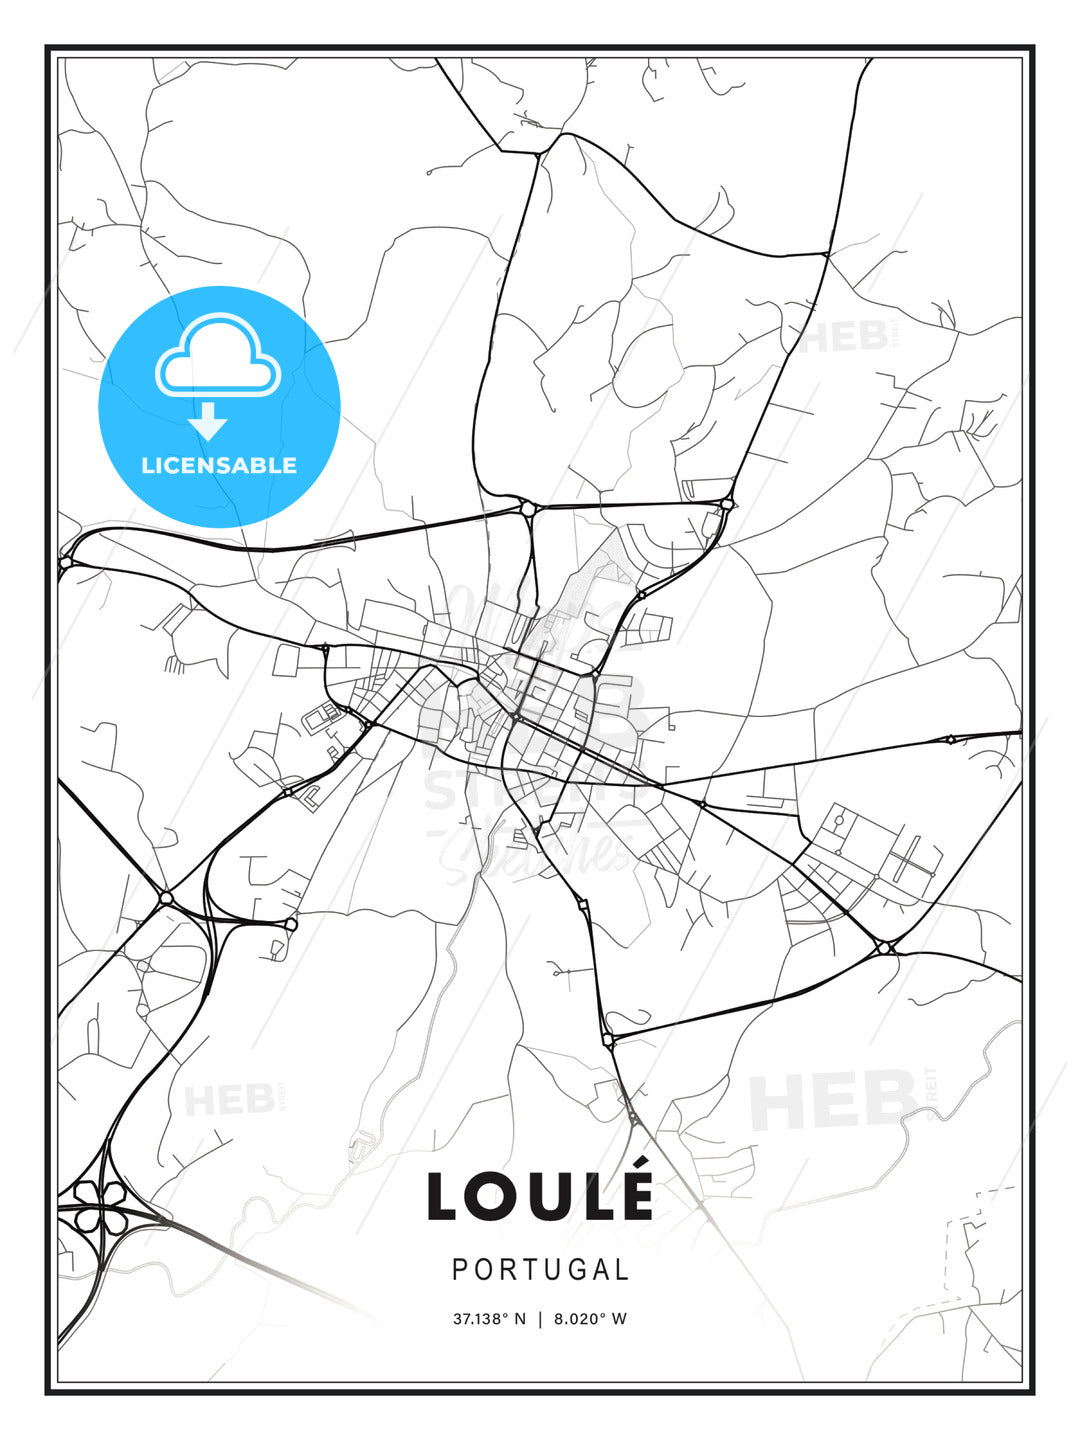 Loulé, Portugal, Modern Print Template in Various Formats - HEBSTREITS Sketches